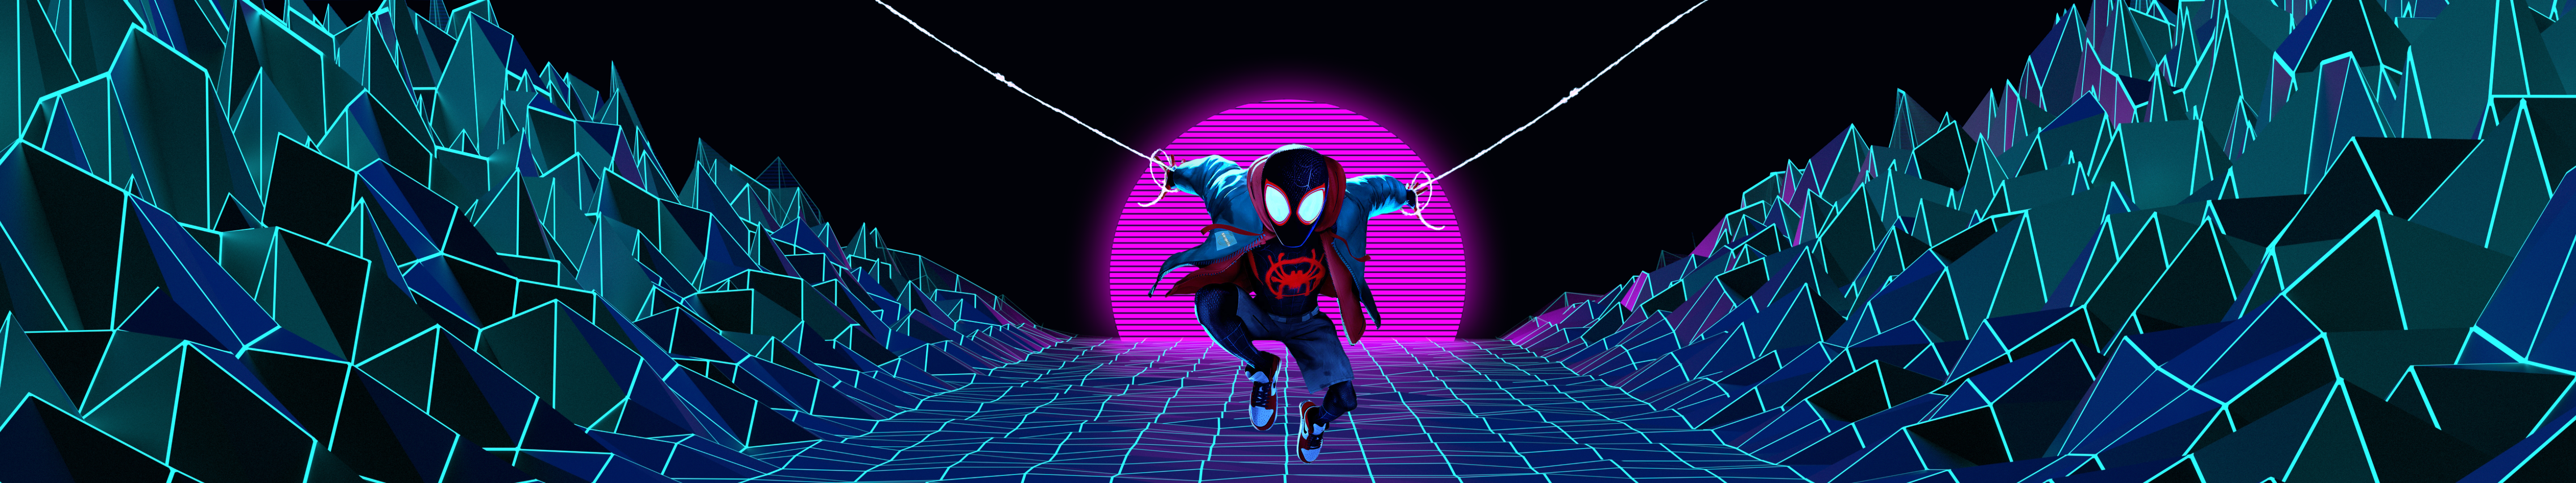 Wide Angle Multiple Display Neon Synthwave Spider Man Into The Spiderverse 5760x1080